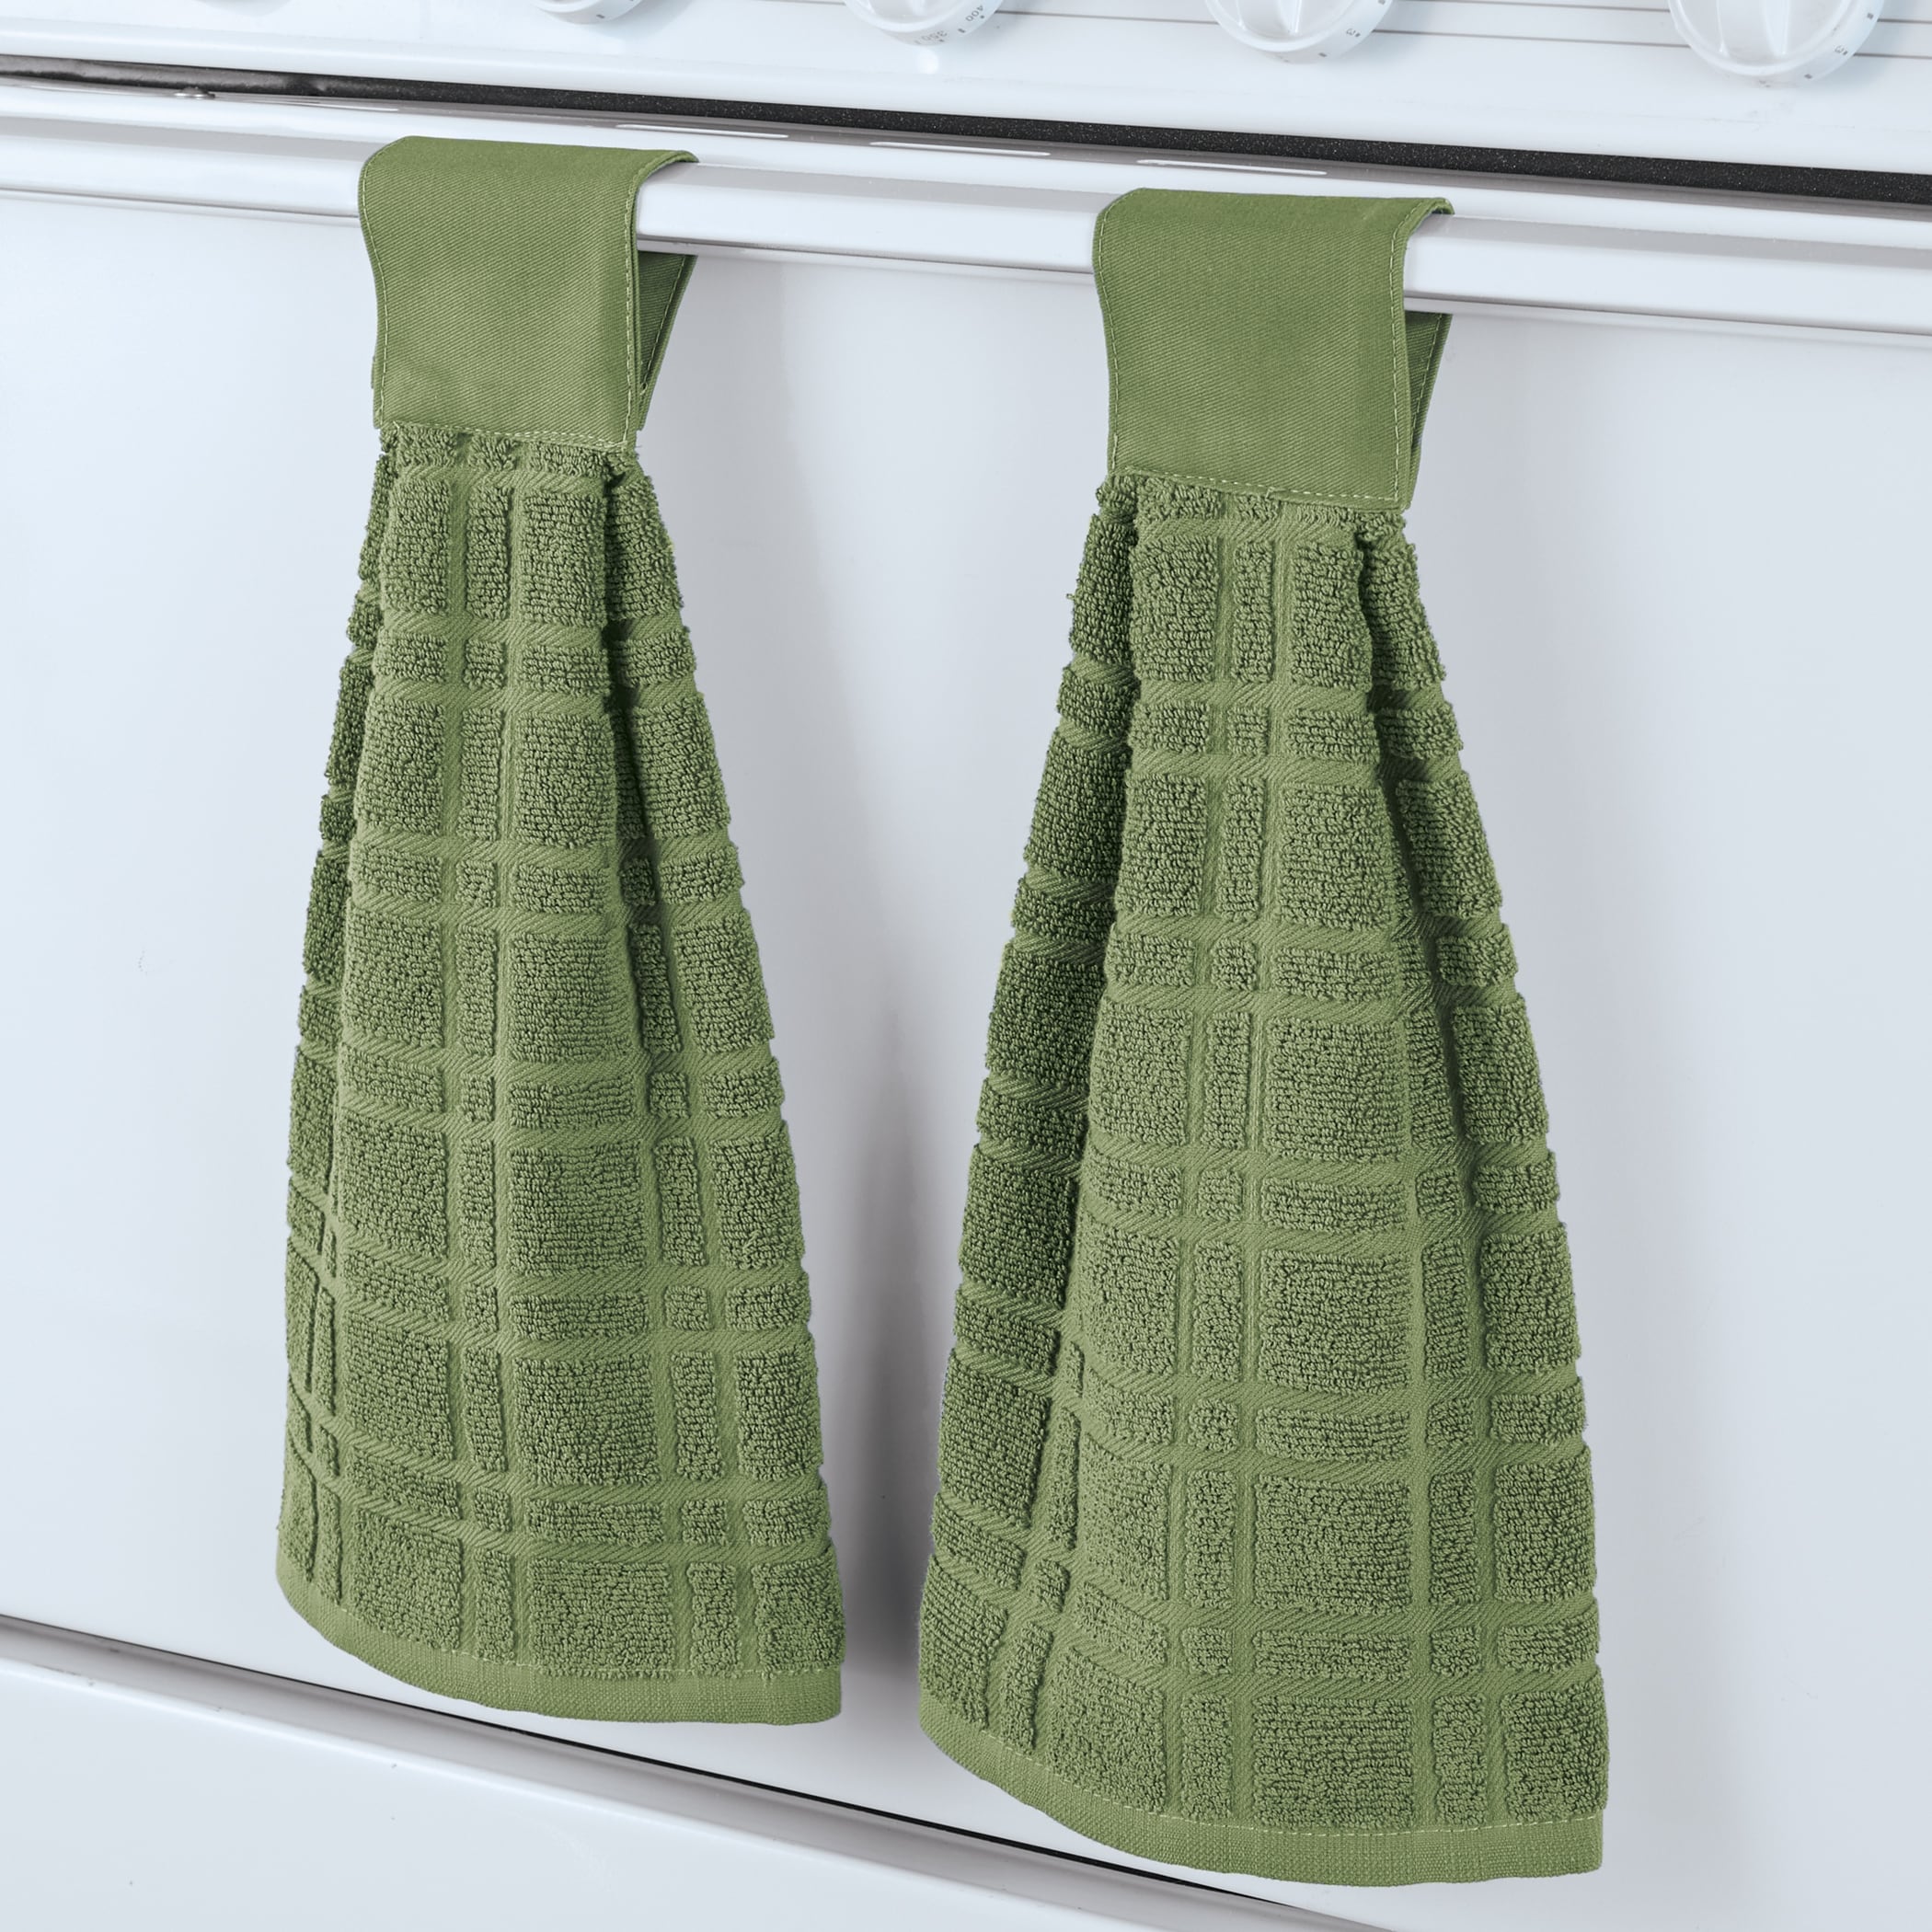 https://ak1.ostkcdn.com/images/products/is/images/direct/d9b210e6ee7e86f75d79bf50050ac5c08d6da89d/Hanging-Tufted-Design-Kitchen-Towels---Set-of-2.jpg